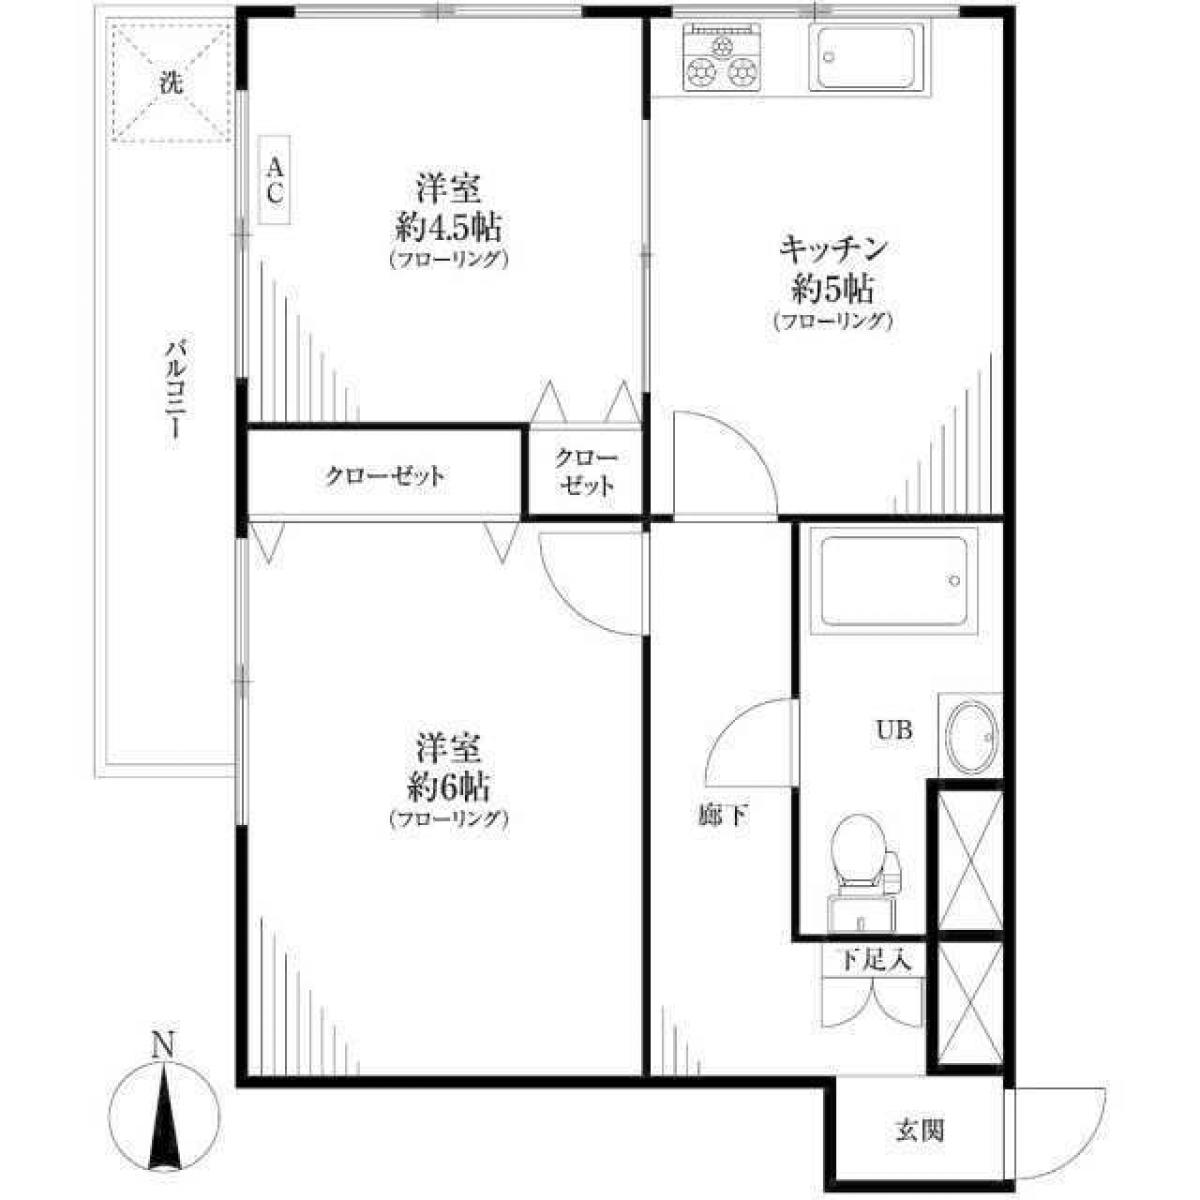 Picture of Apartment For Sale in Nakano Ku, Tokyo, Japan